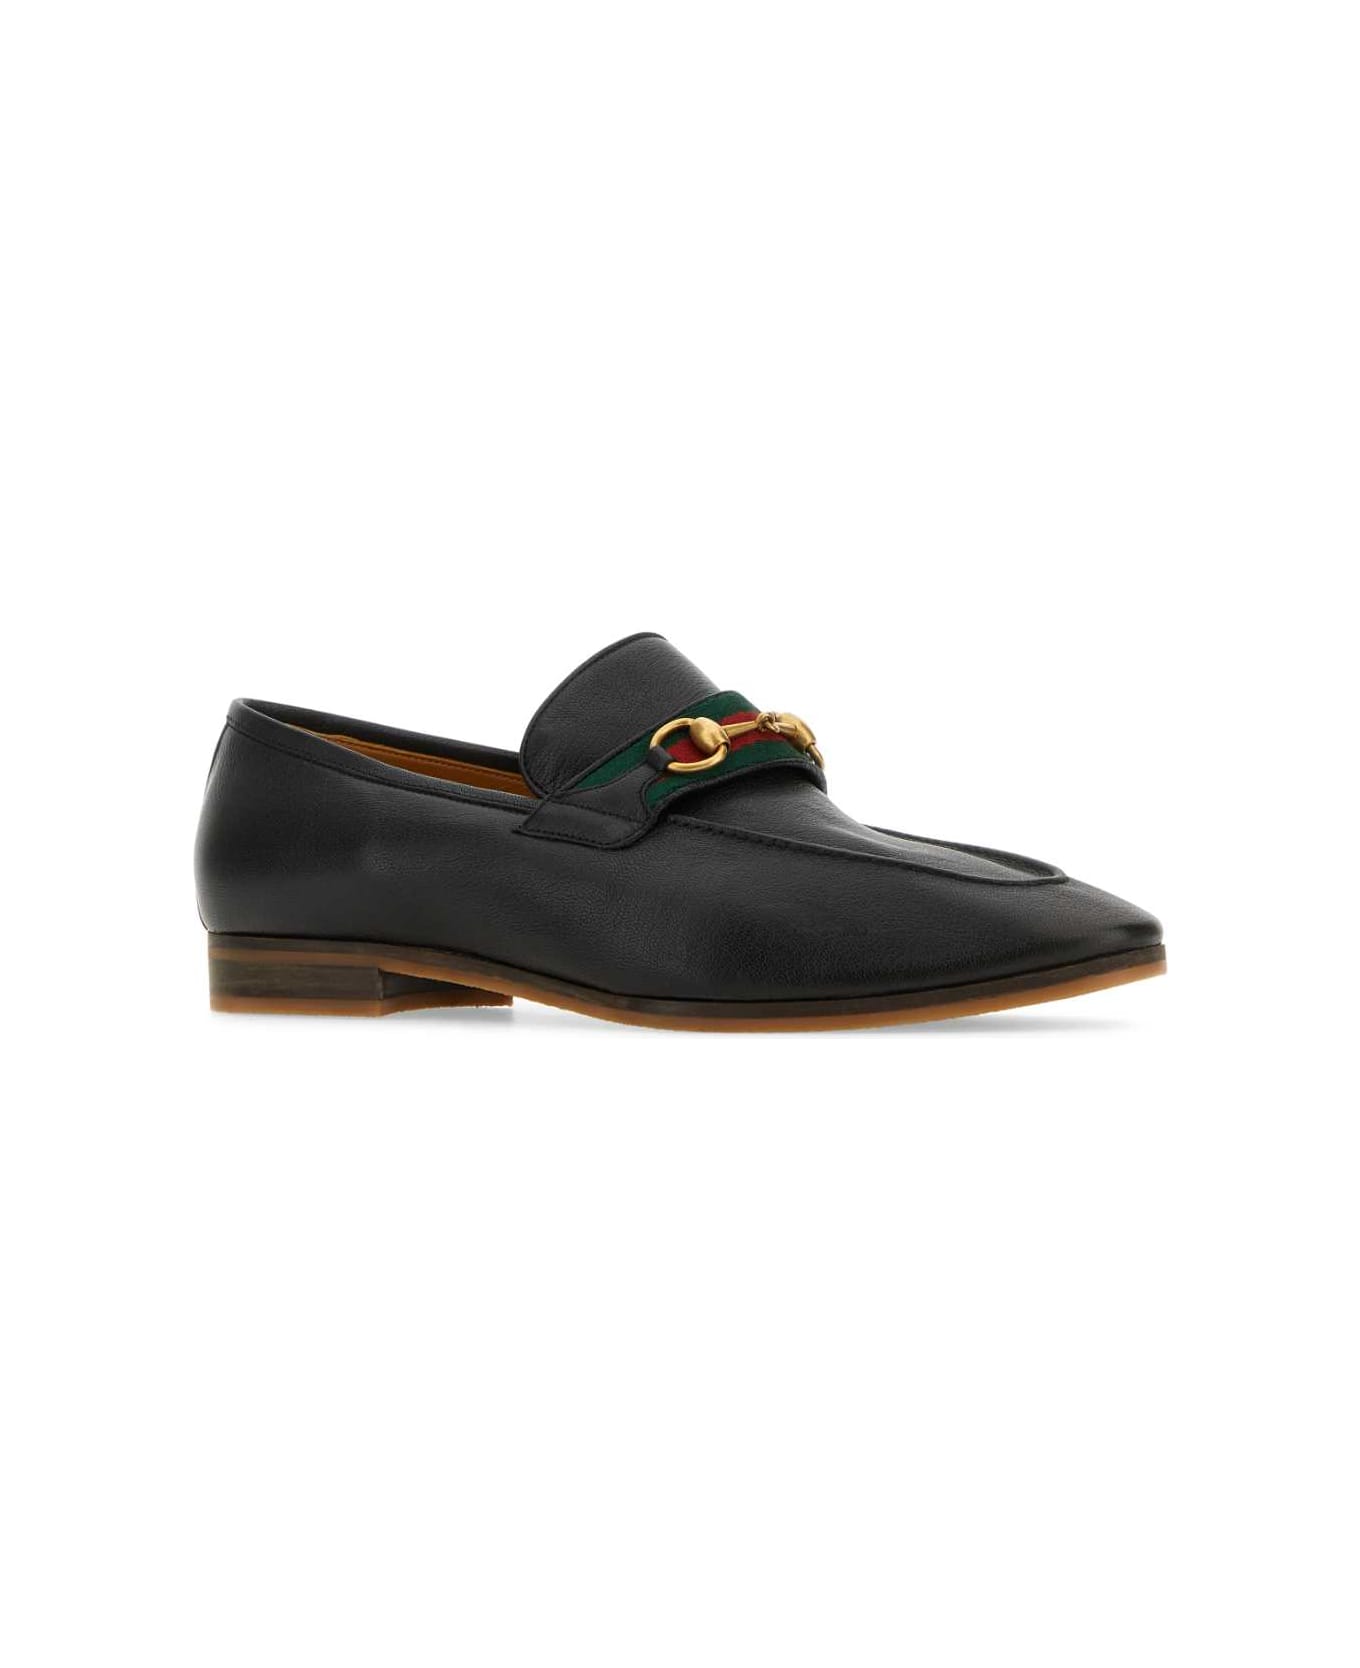 Gucci Black Leather Loafers - BLK